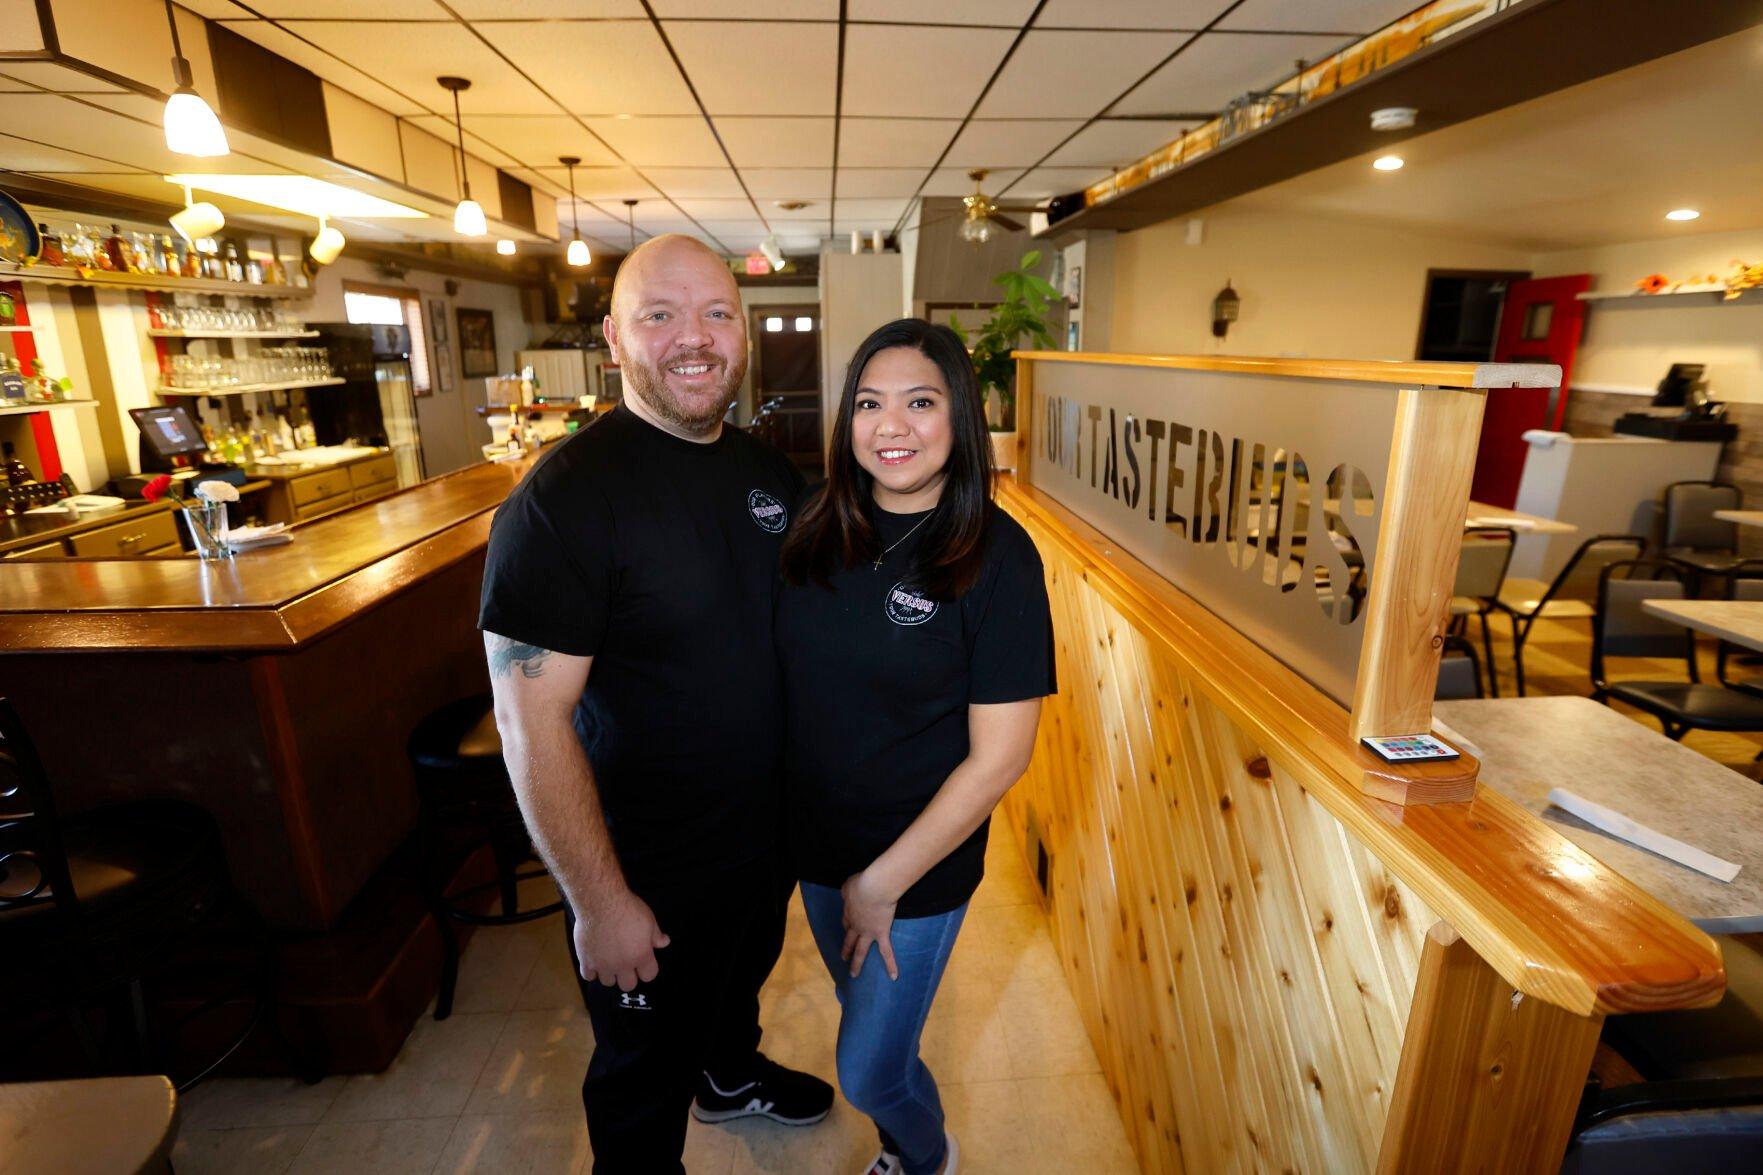 Lucas and Liberty Miller own Versus 2.0 Authentic Asian Kitchen/Bar at 2364 Washington St. in Dubuque.    PHOTO CREDIT: JESSICA REILLY
Telegraph Herald